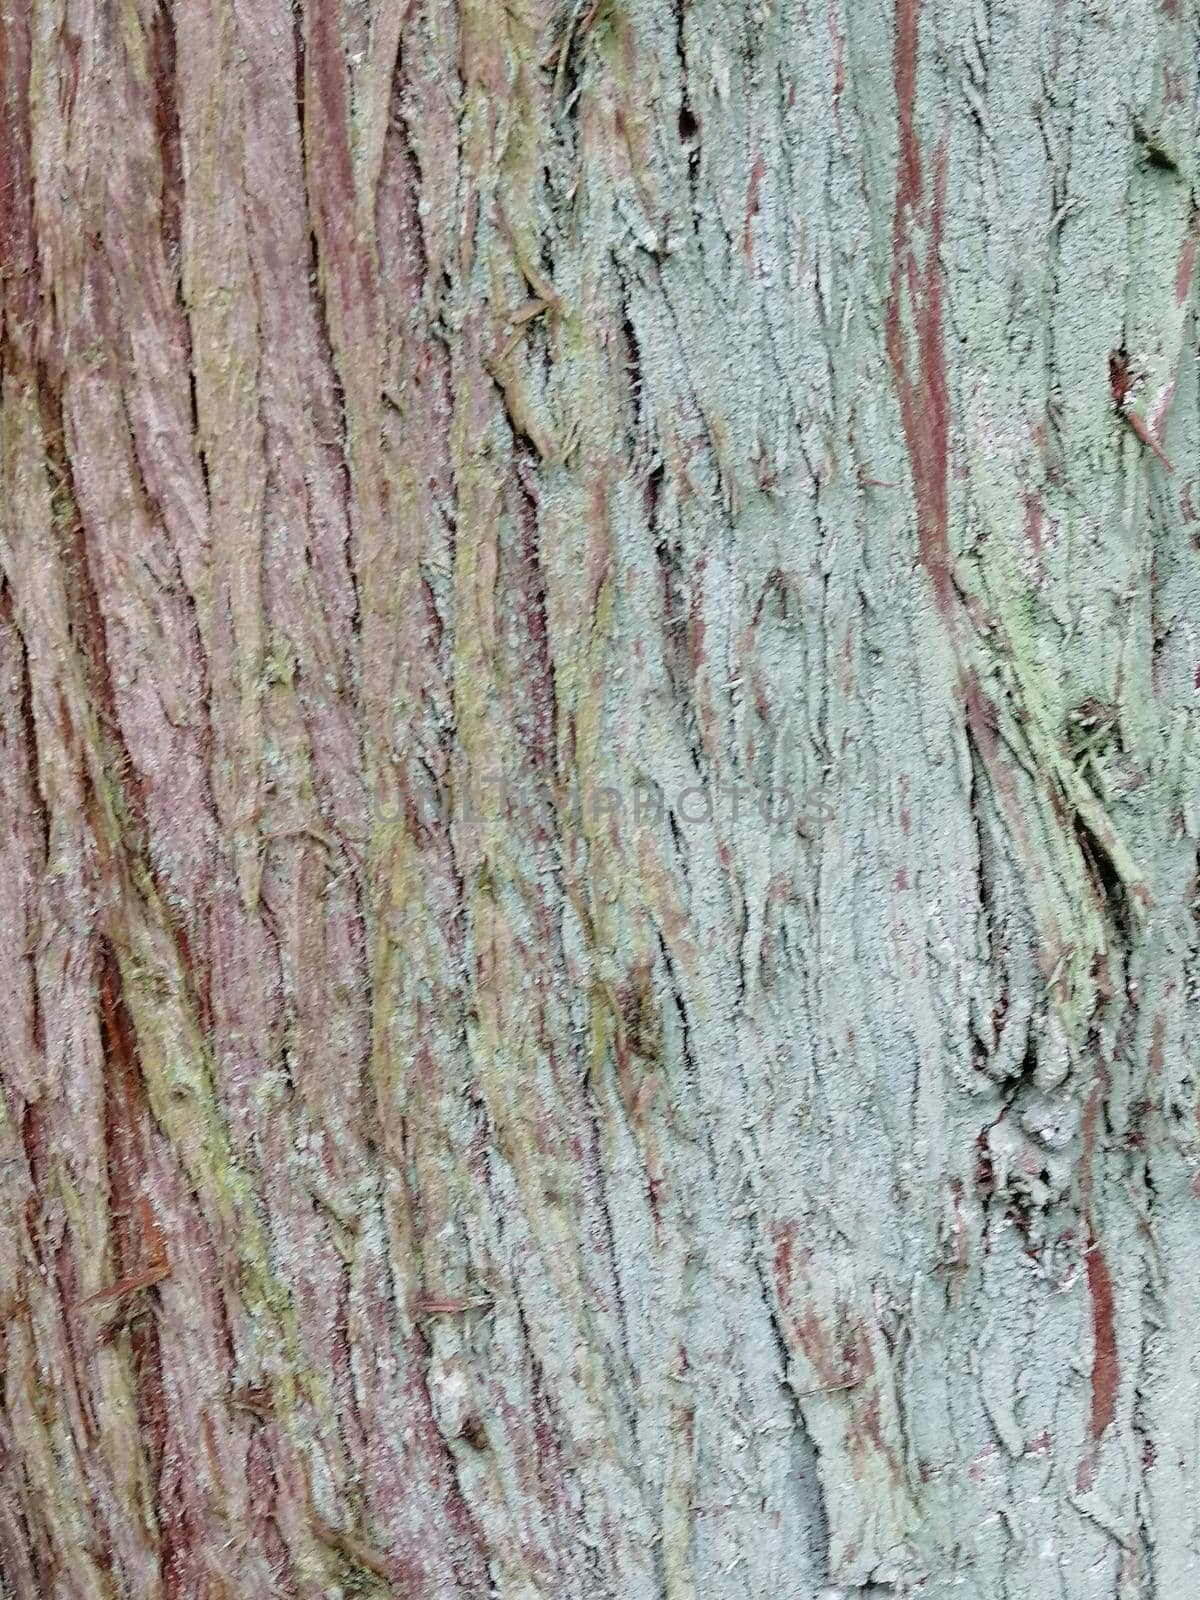 Close up of colorful old wood with mossy textured pattern